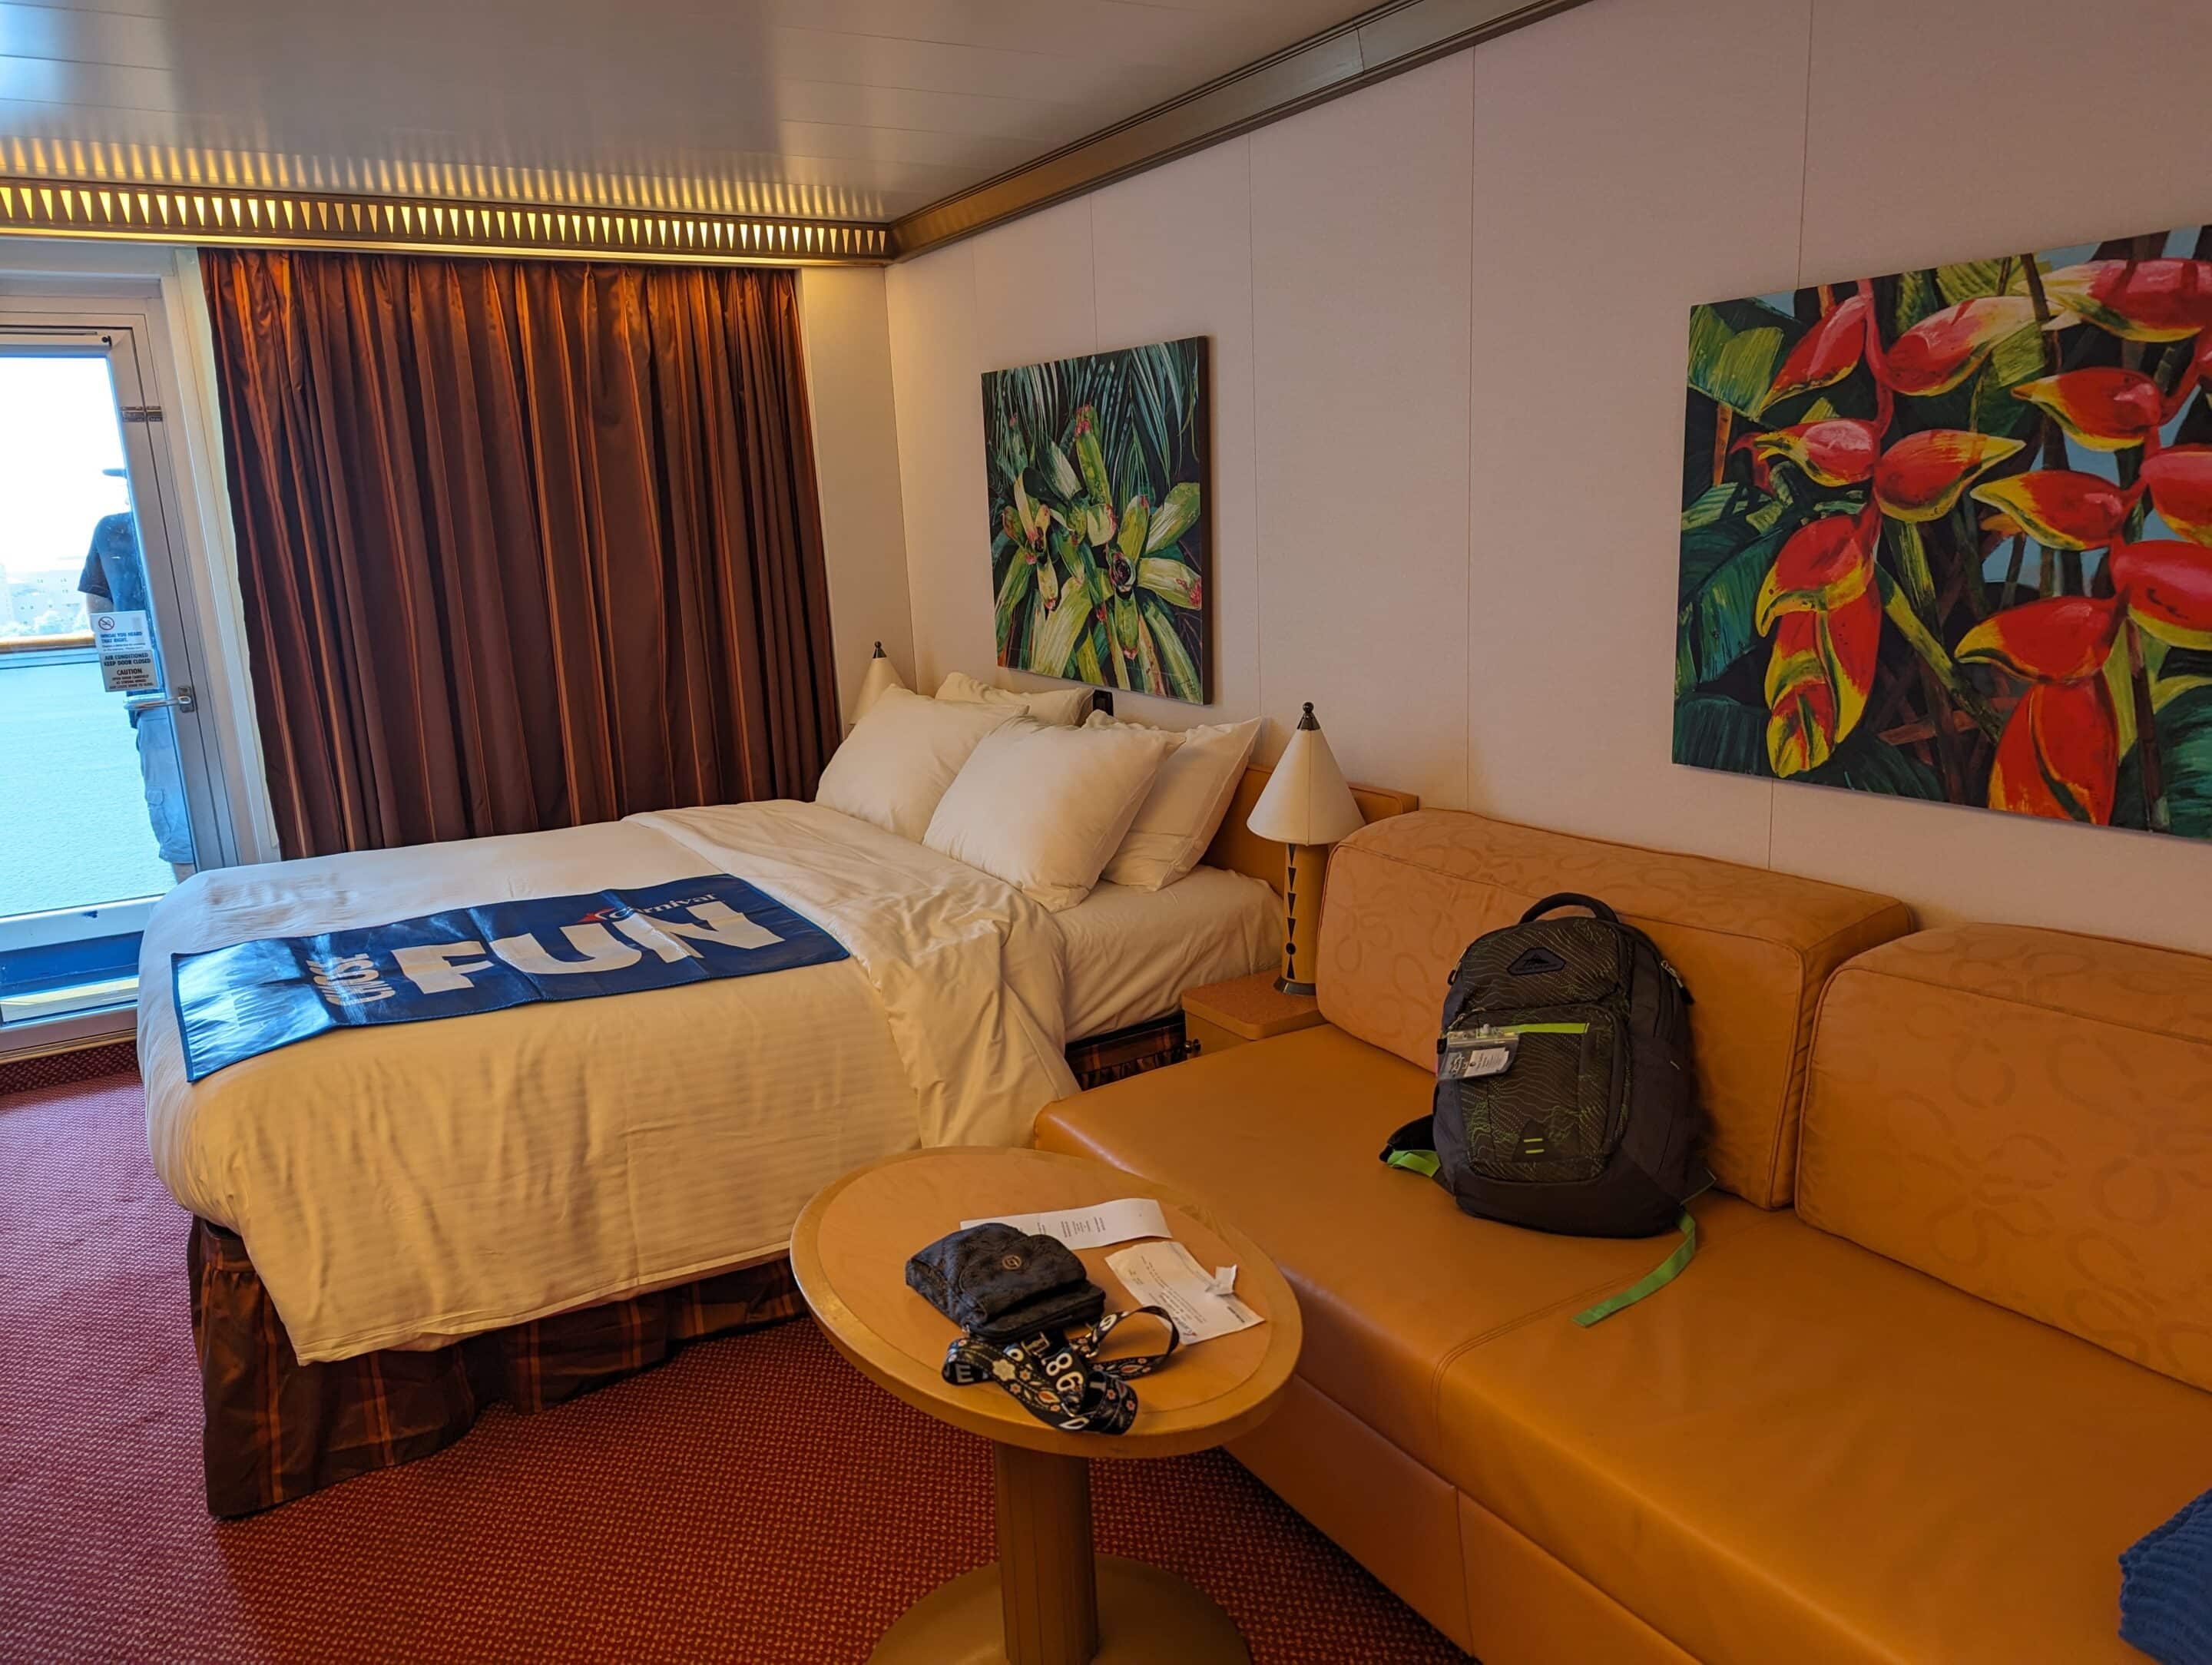 A Carnival Cruise balcony stateroom on Carnival magic shows bed, couch, and the large balcony window room 8435